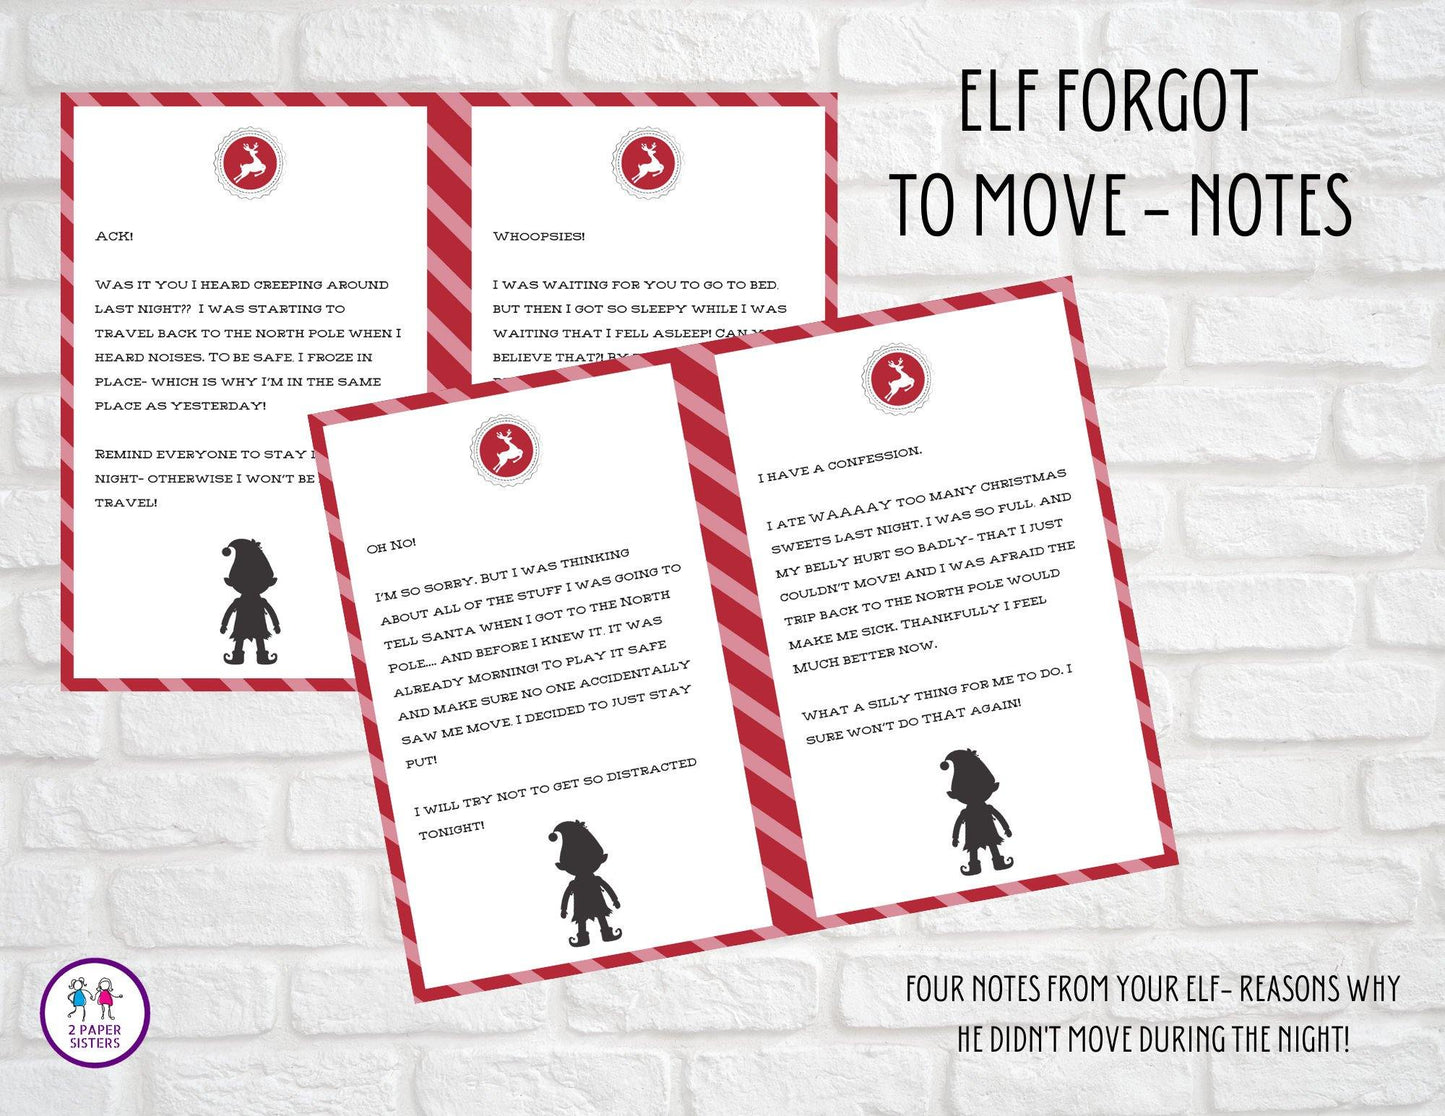 Elf on the Shelf, Elf forgot to move, Elf excuse notes, letter from elf, Christmas, Santa, Scout Elf, INSTANT DOWNLOAD - 2 Paper Sisters